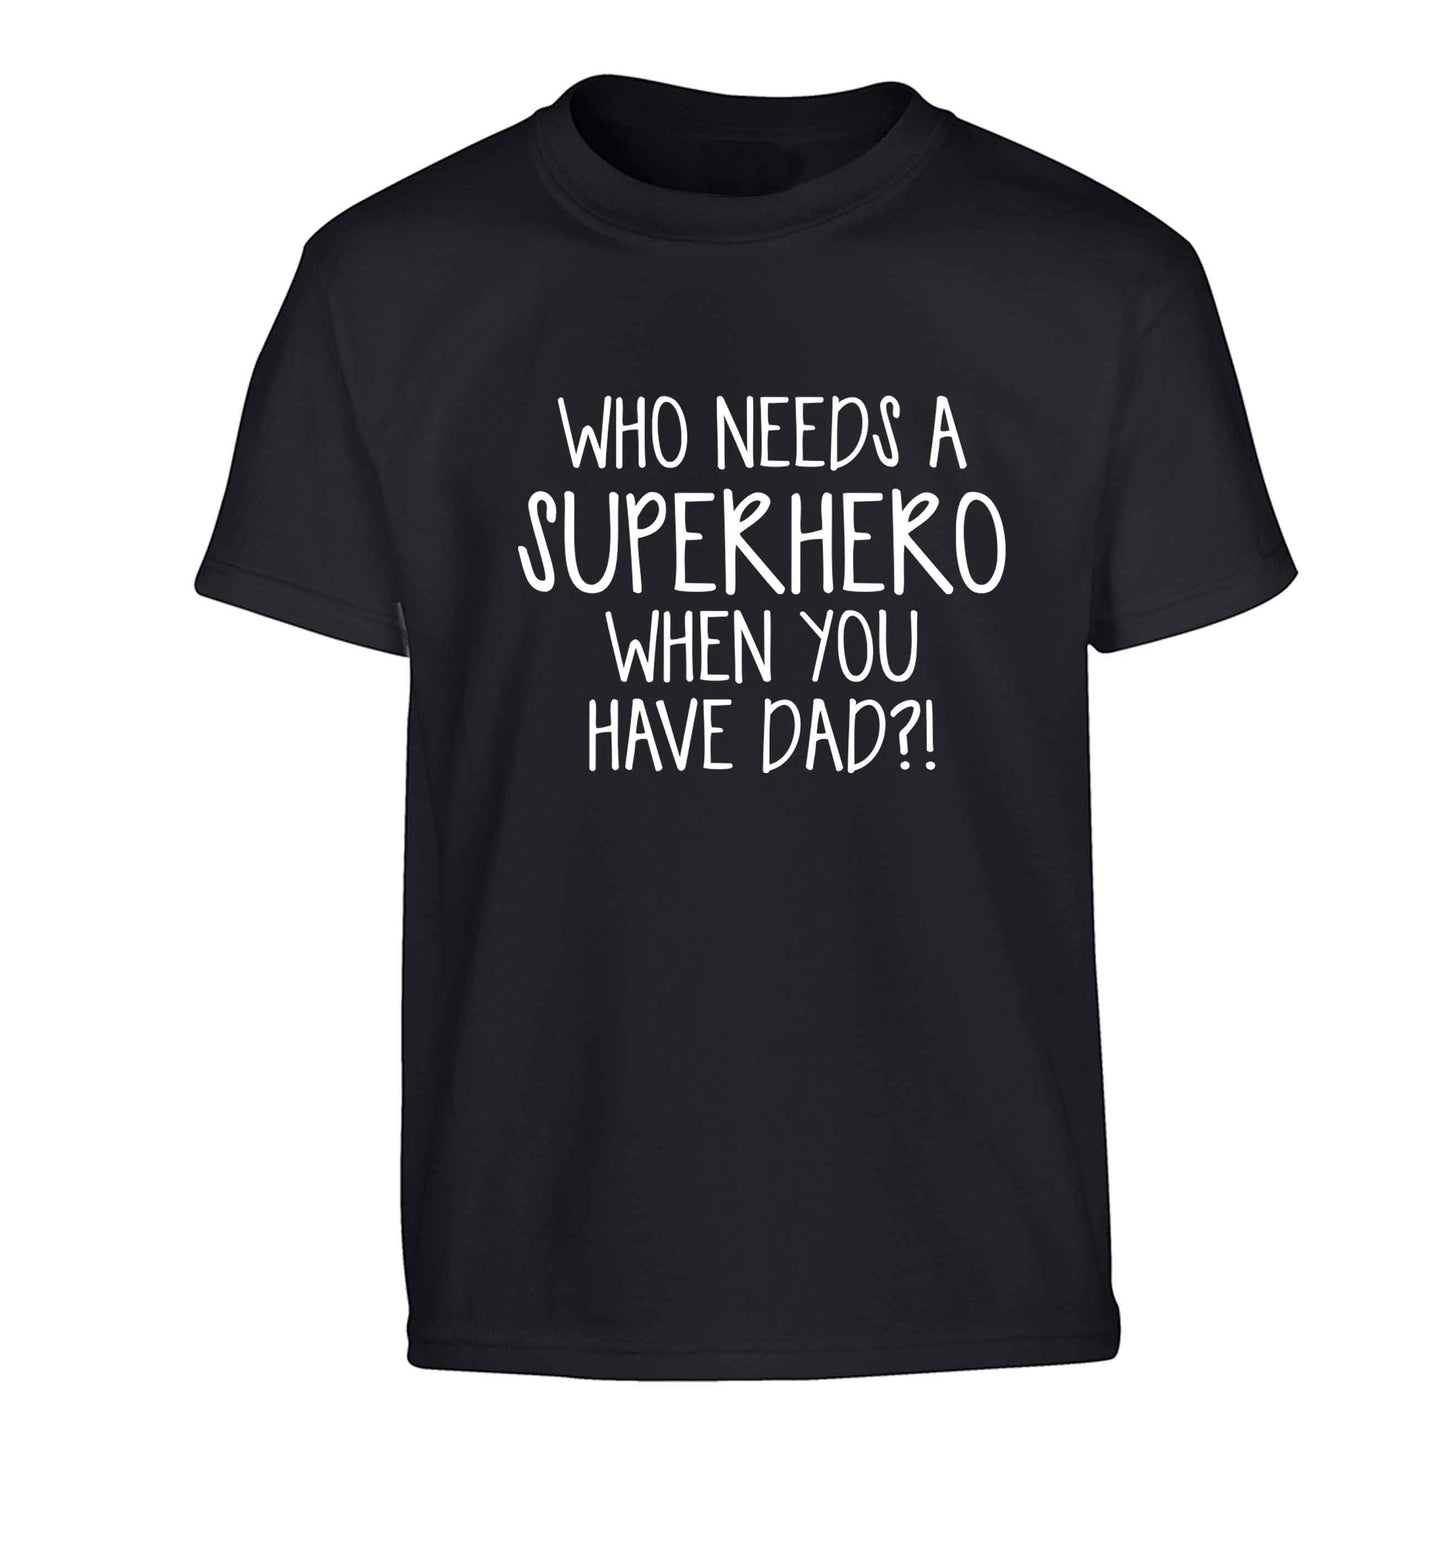 Who needs a superhero when you have dad! Children's black Tshirt 12-13 Years